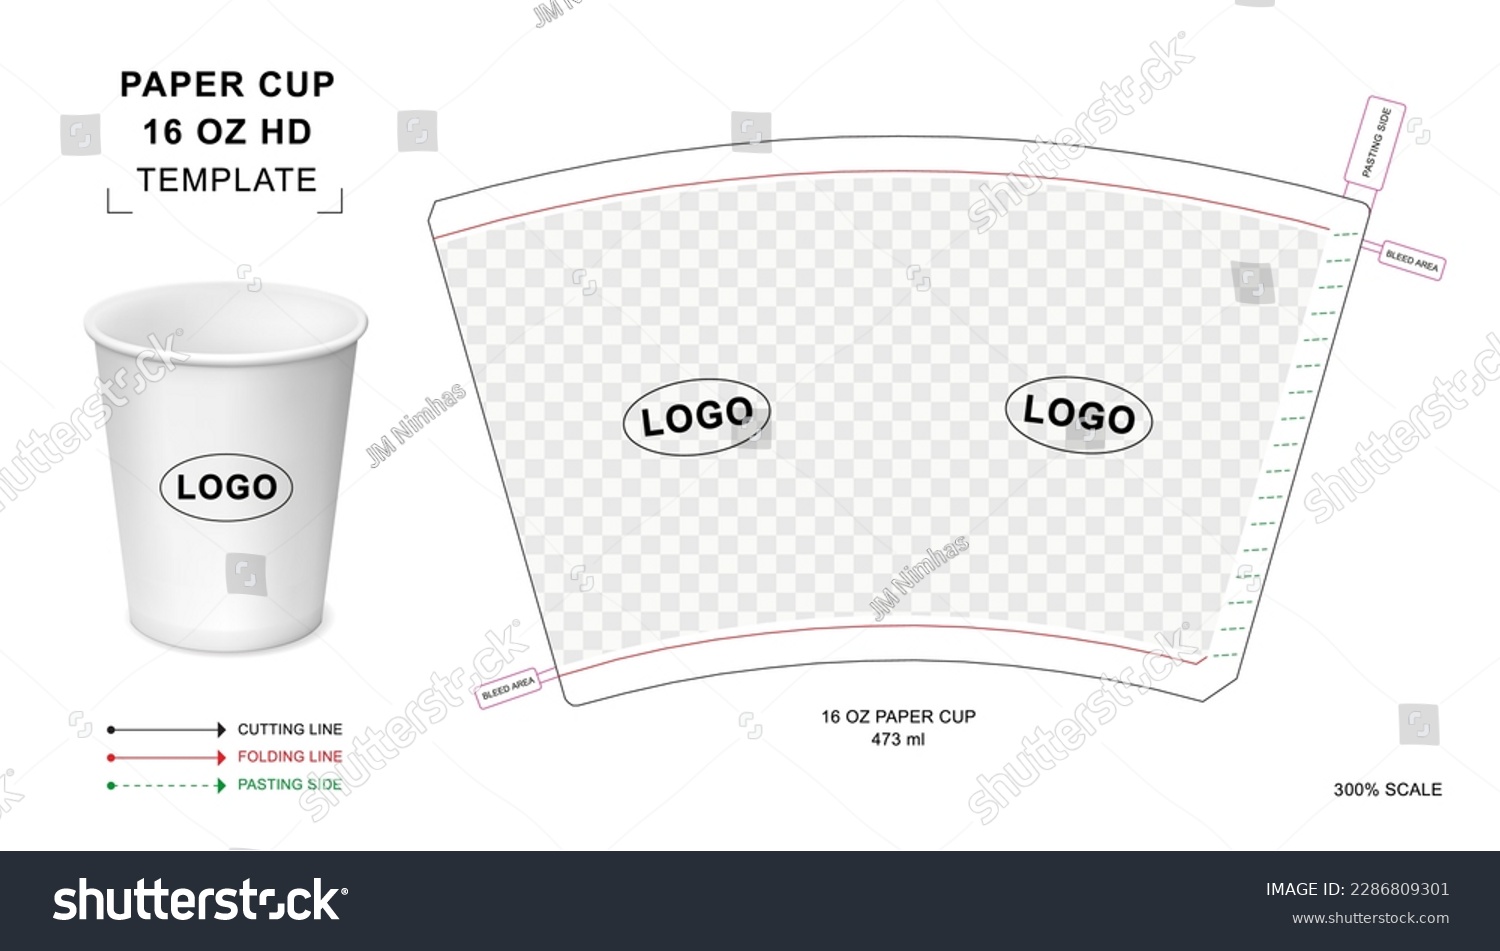 SVG of Paper cup die cut template for 16 oz HD svg